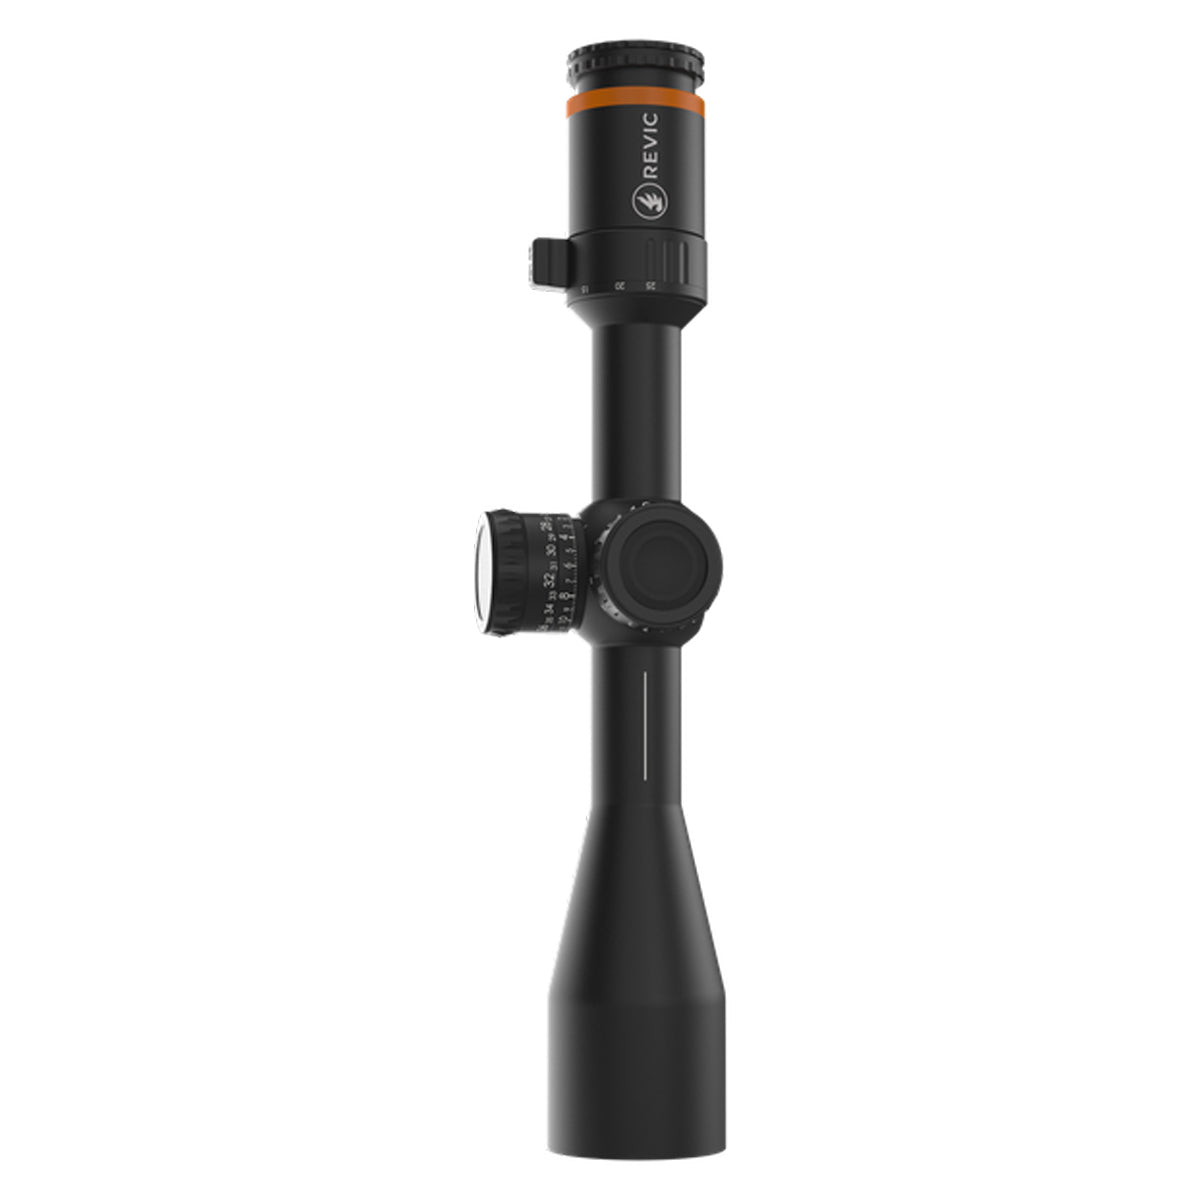 Revic Acura RS25i 5-25x50 Illuminated Riflescope in  by GOHUNT | Revic - GOHUNT Shop